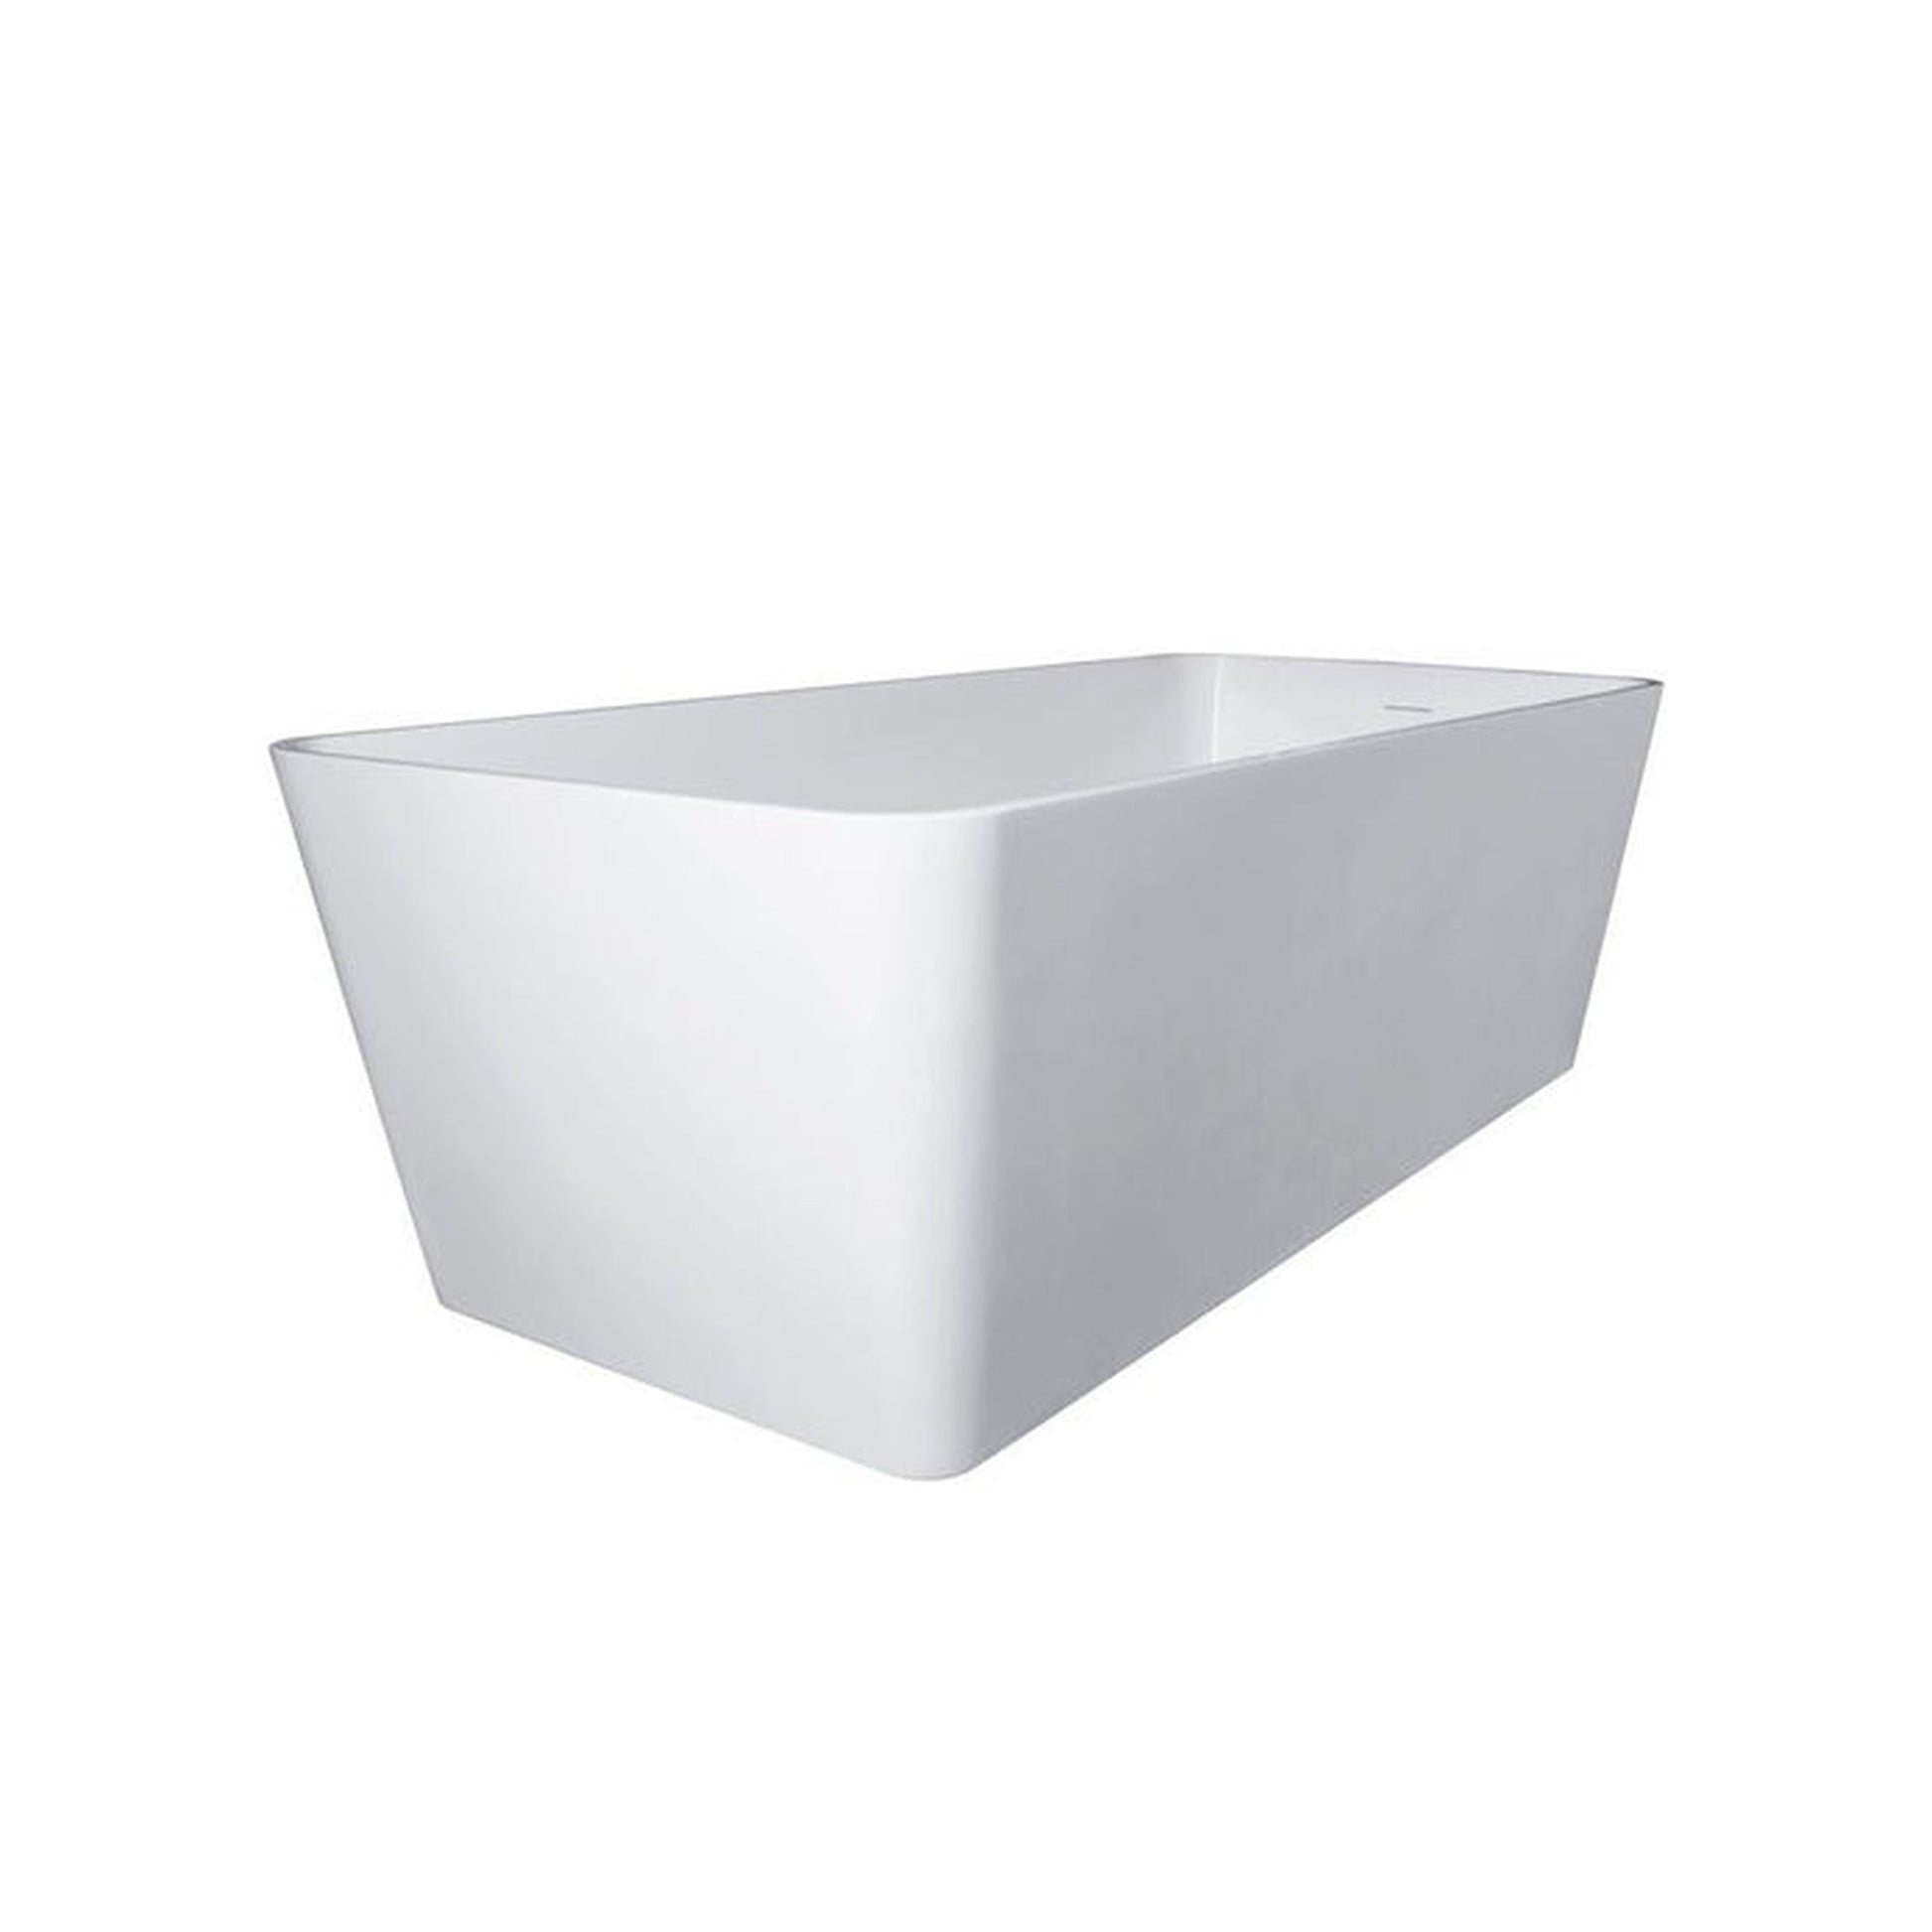 Vanity Art 67" Matte White Solid Surface Resin Stone Freestanding Soaking Tub With Slotted Overflow and Pop-up Drain